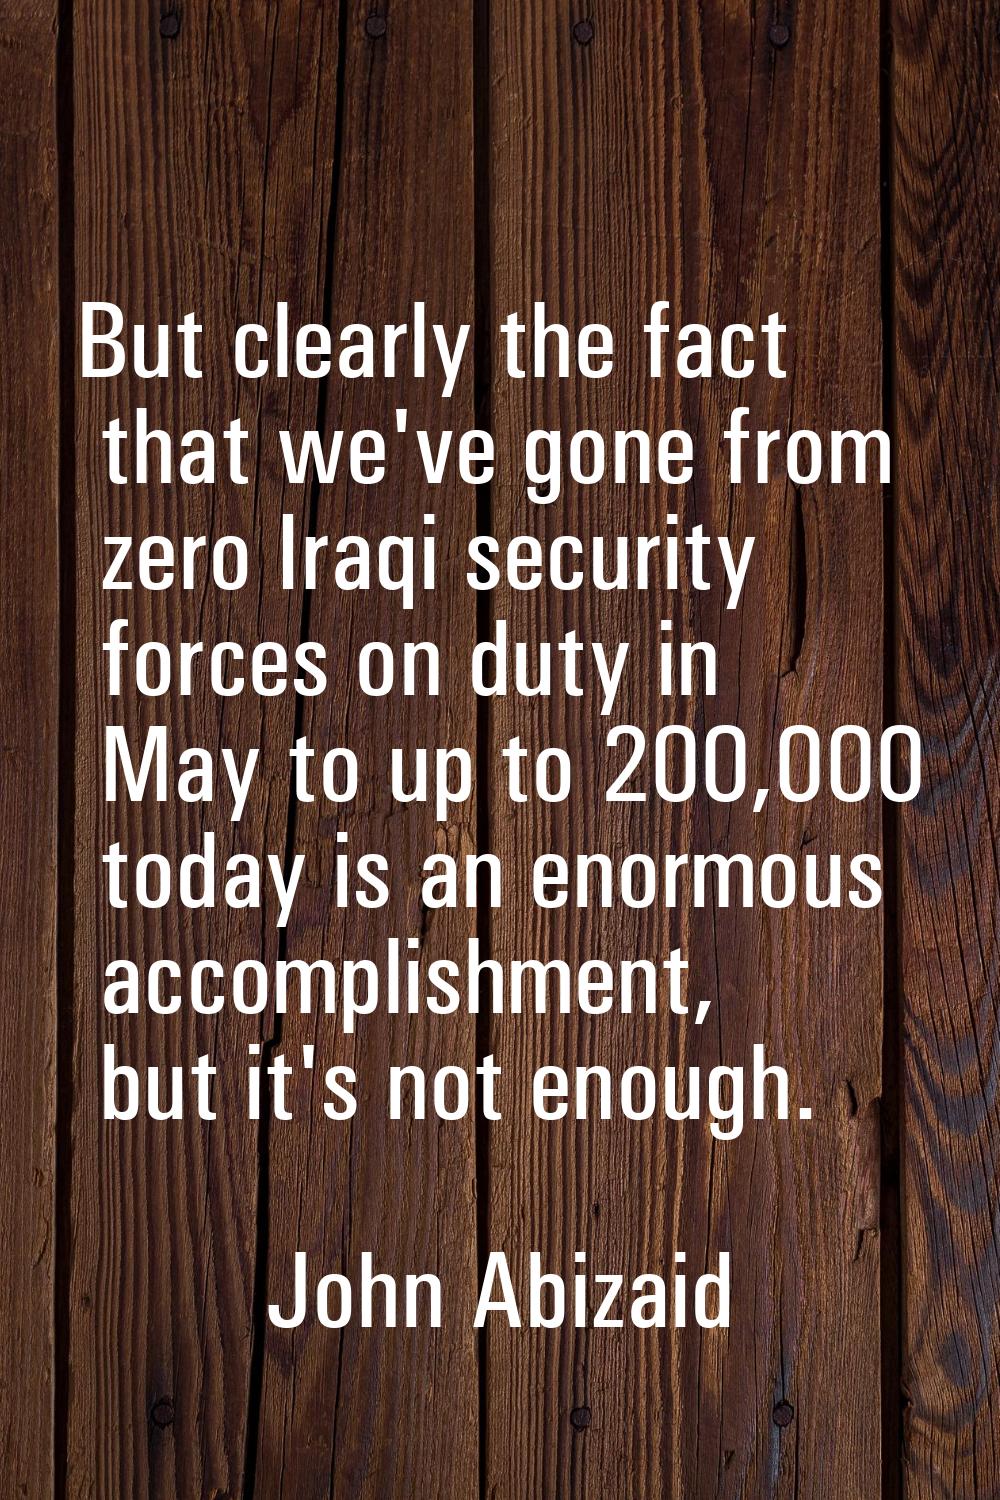 But clearly the fact that we've gone from zero Iraqi security forces on duty in May to up to 200,00